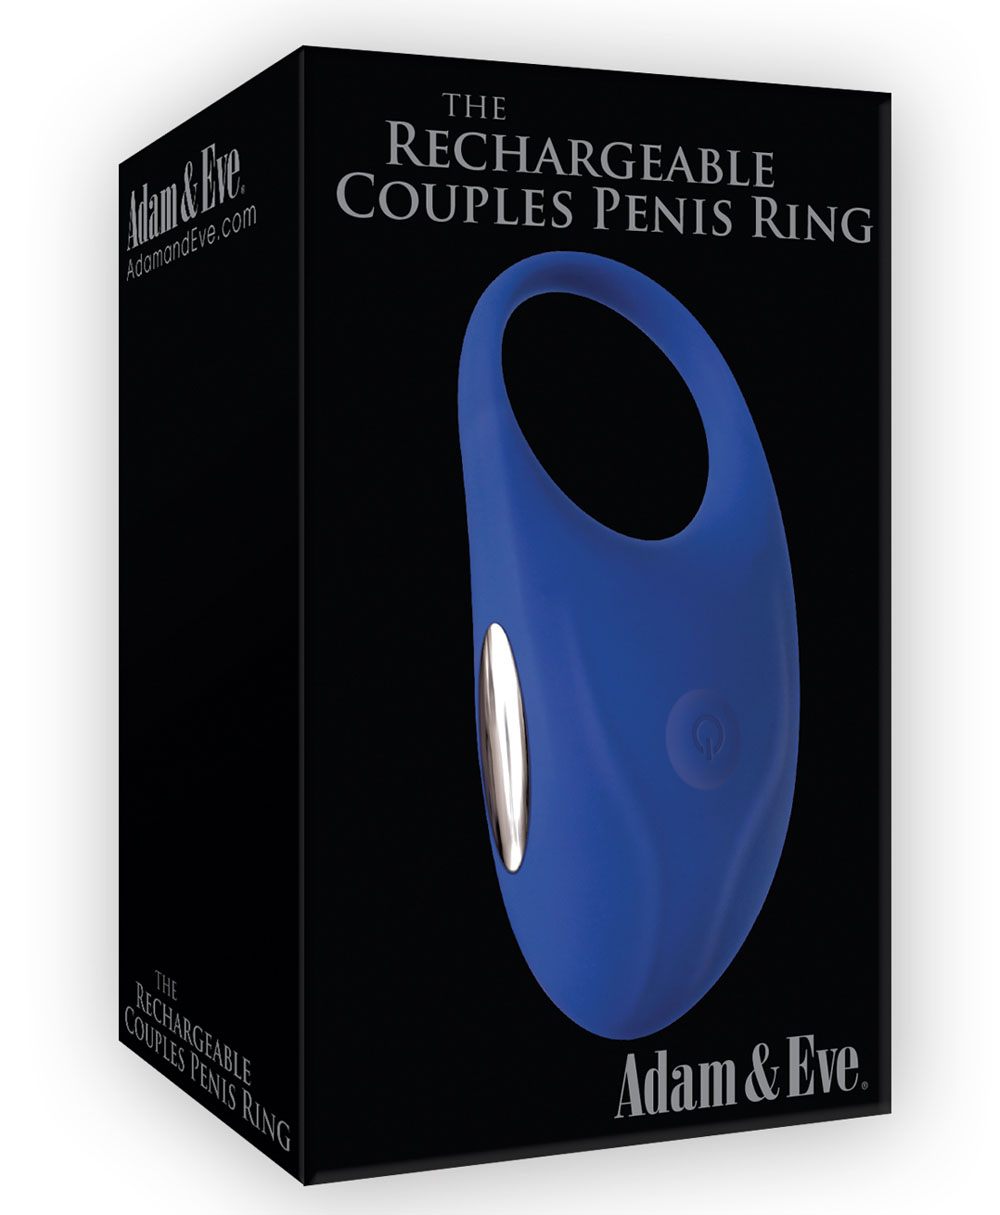 Adam & Eve the Rechargeable Couples Penis Ring